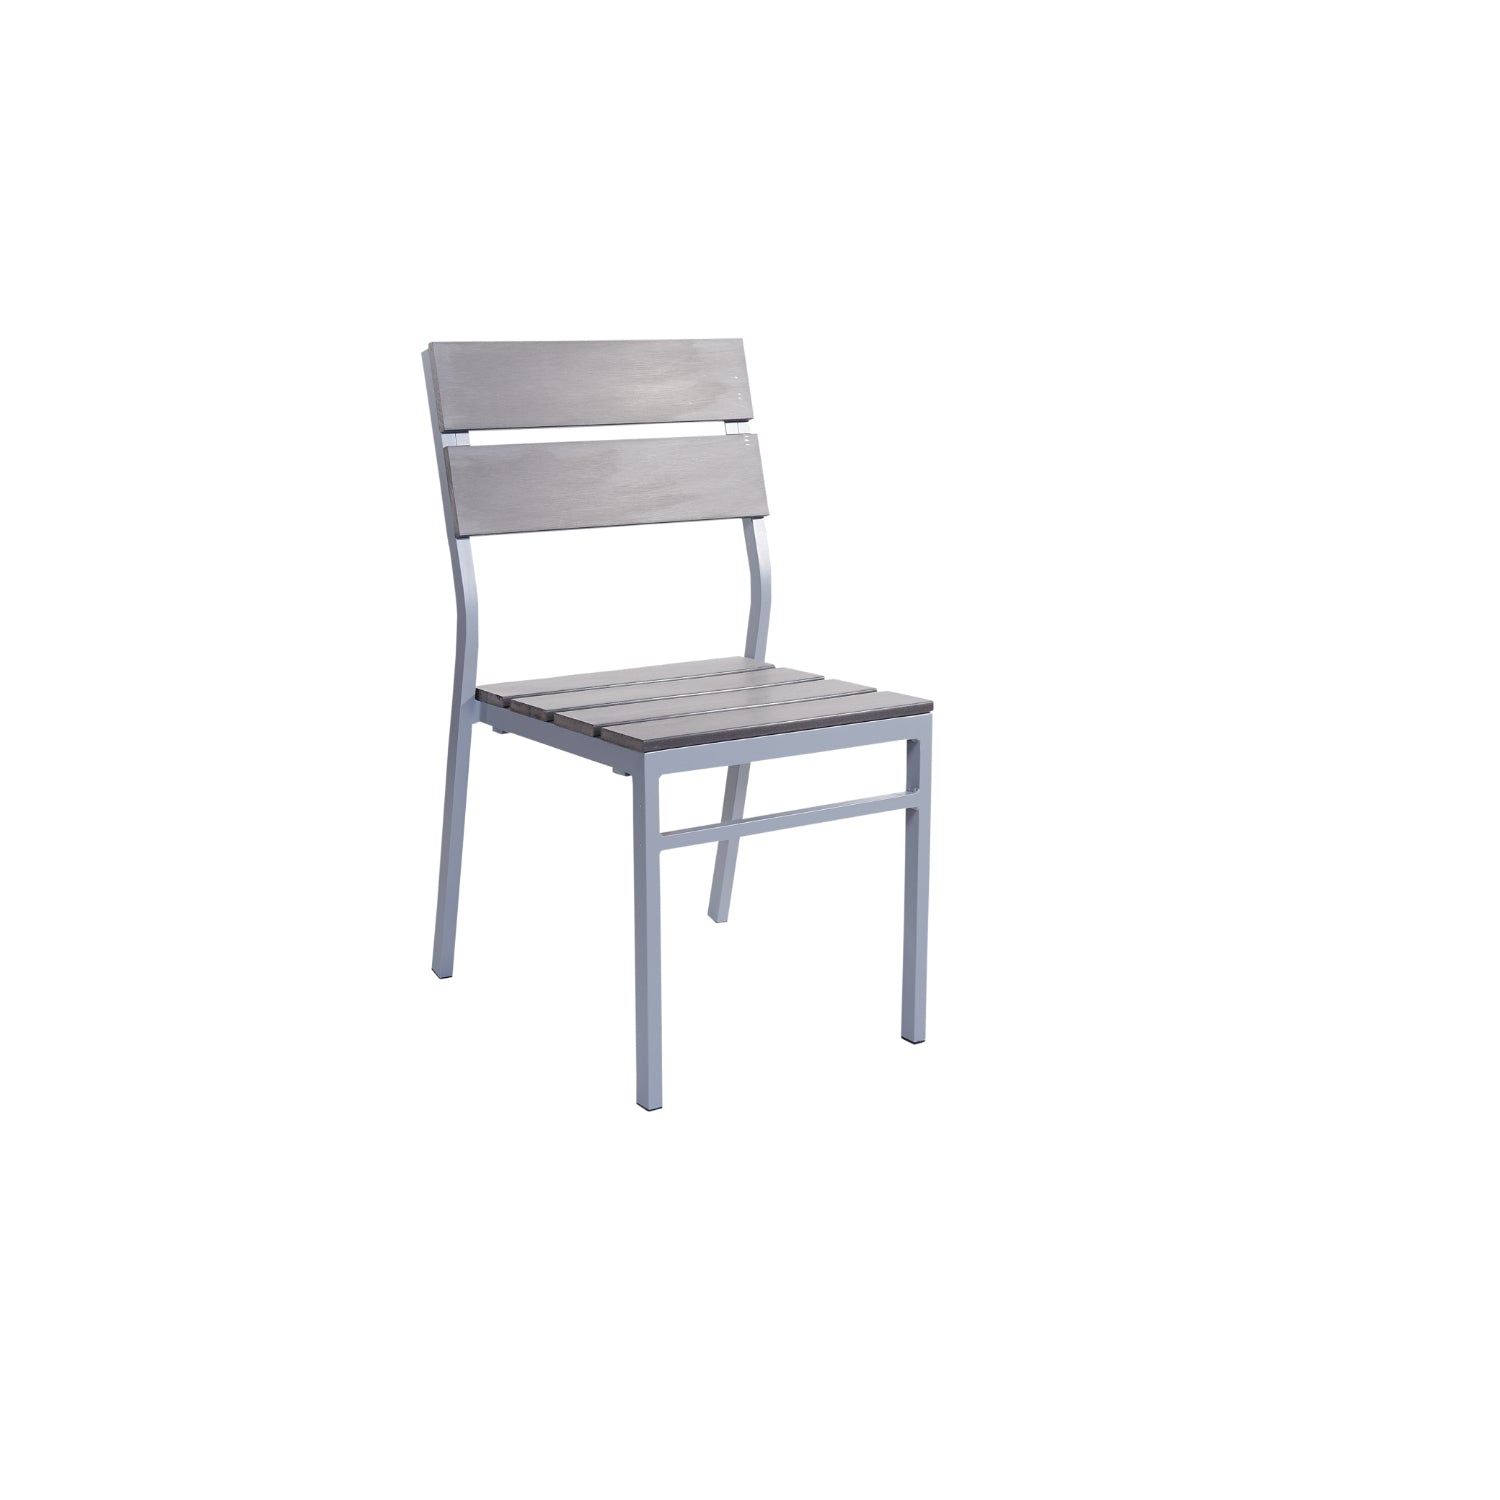 Seaside Collection Outdoor/Indoor Stacking Aluminum Side Chair with Gray Synthetic Teak Seat and Back